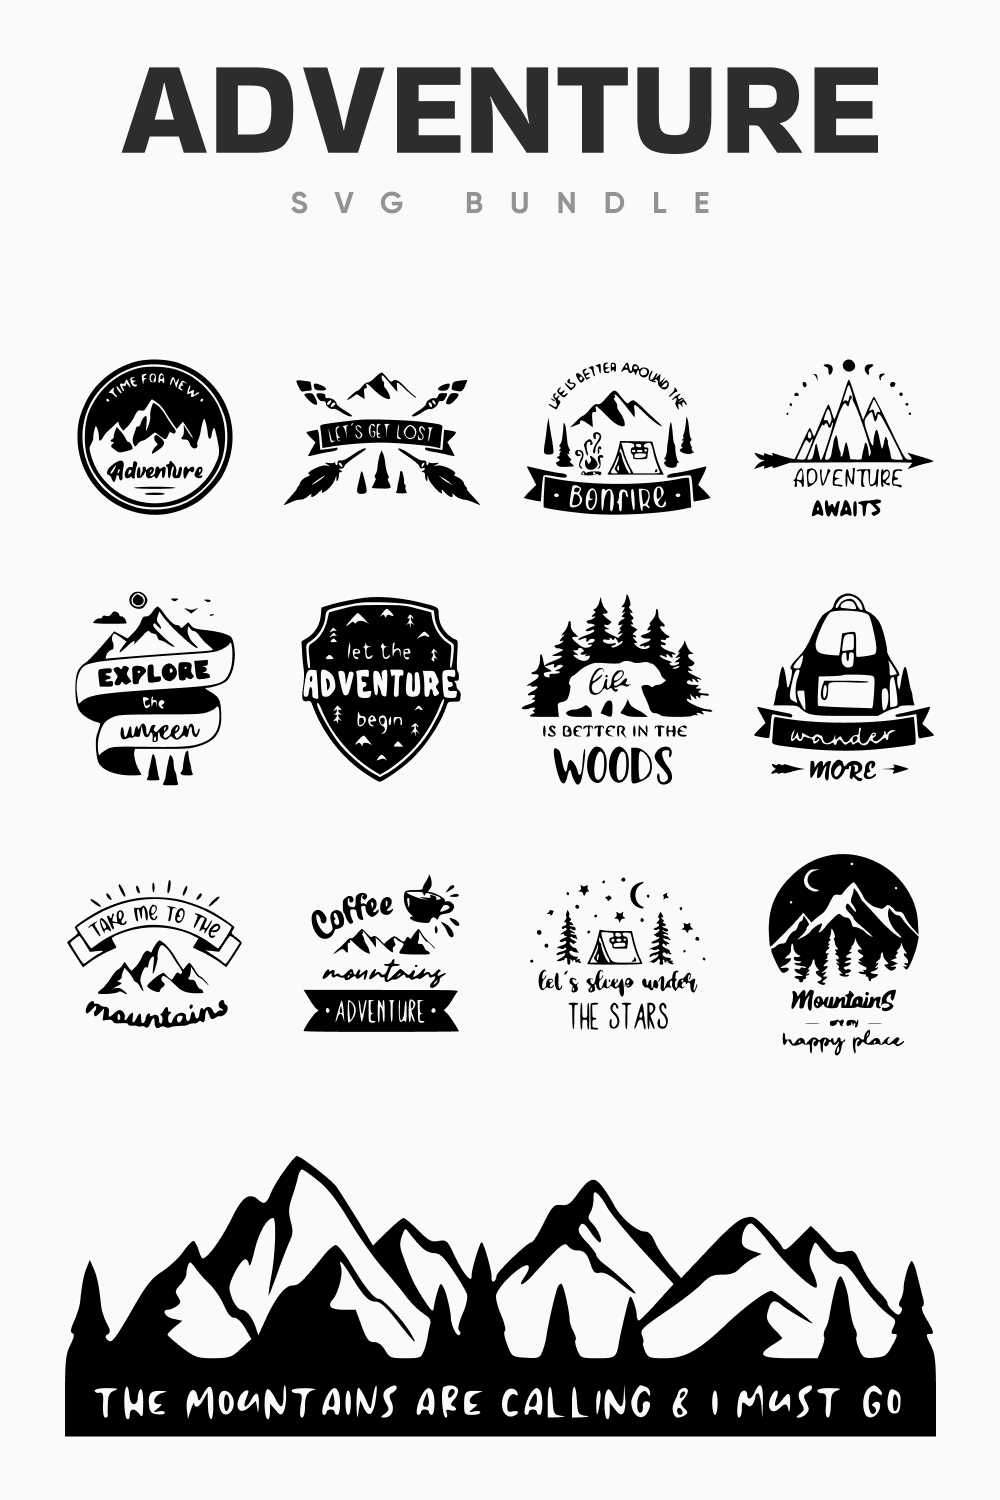 Interesting logos on the theme of mountains and forests.